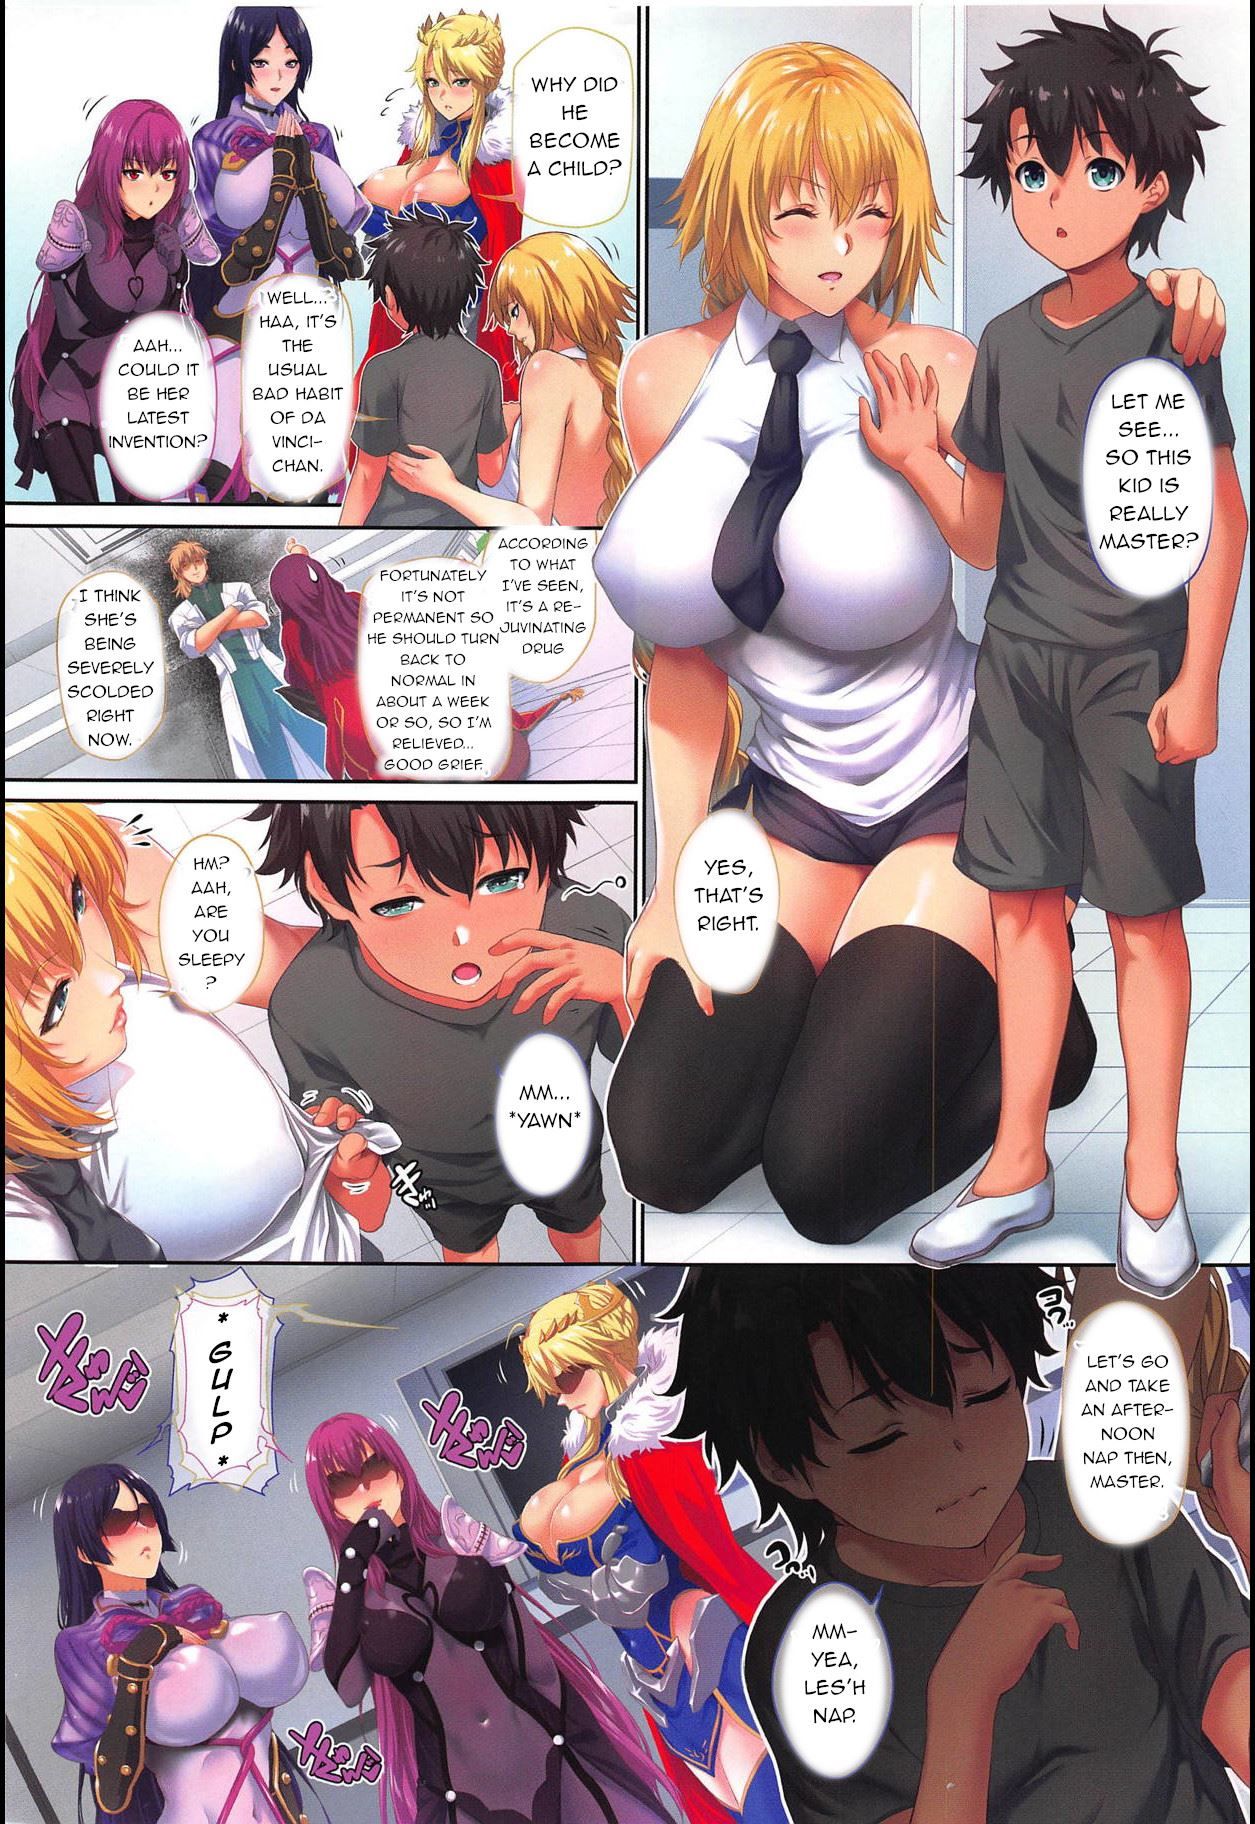 Ritsuka-kuns Misfortune? The Targeted Lamb by zucchini page 3